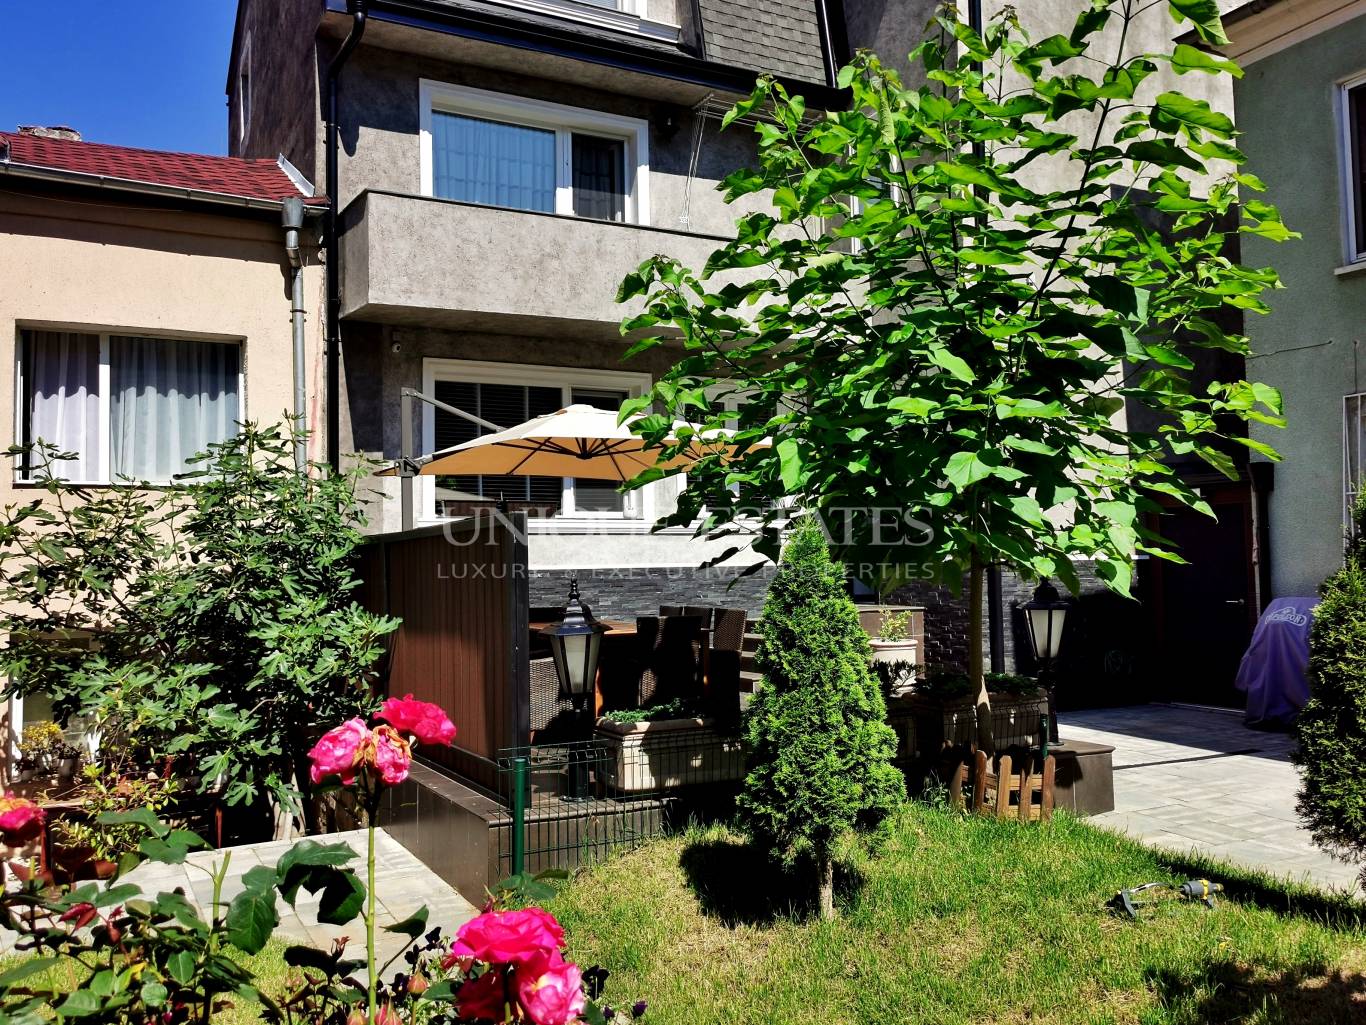 House for sale in Sofia, Downtown with listing ID: K13548 - image 19